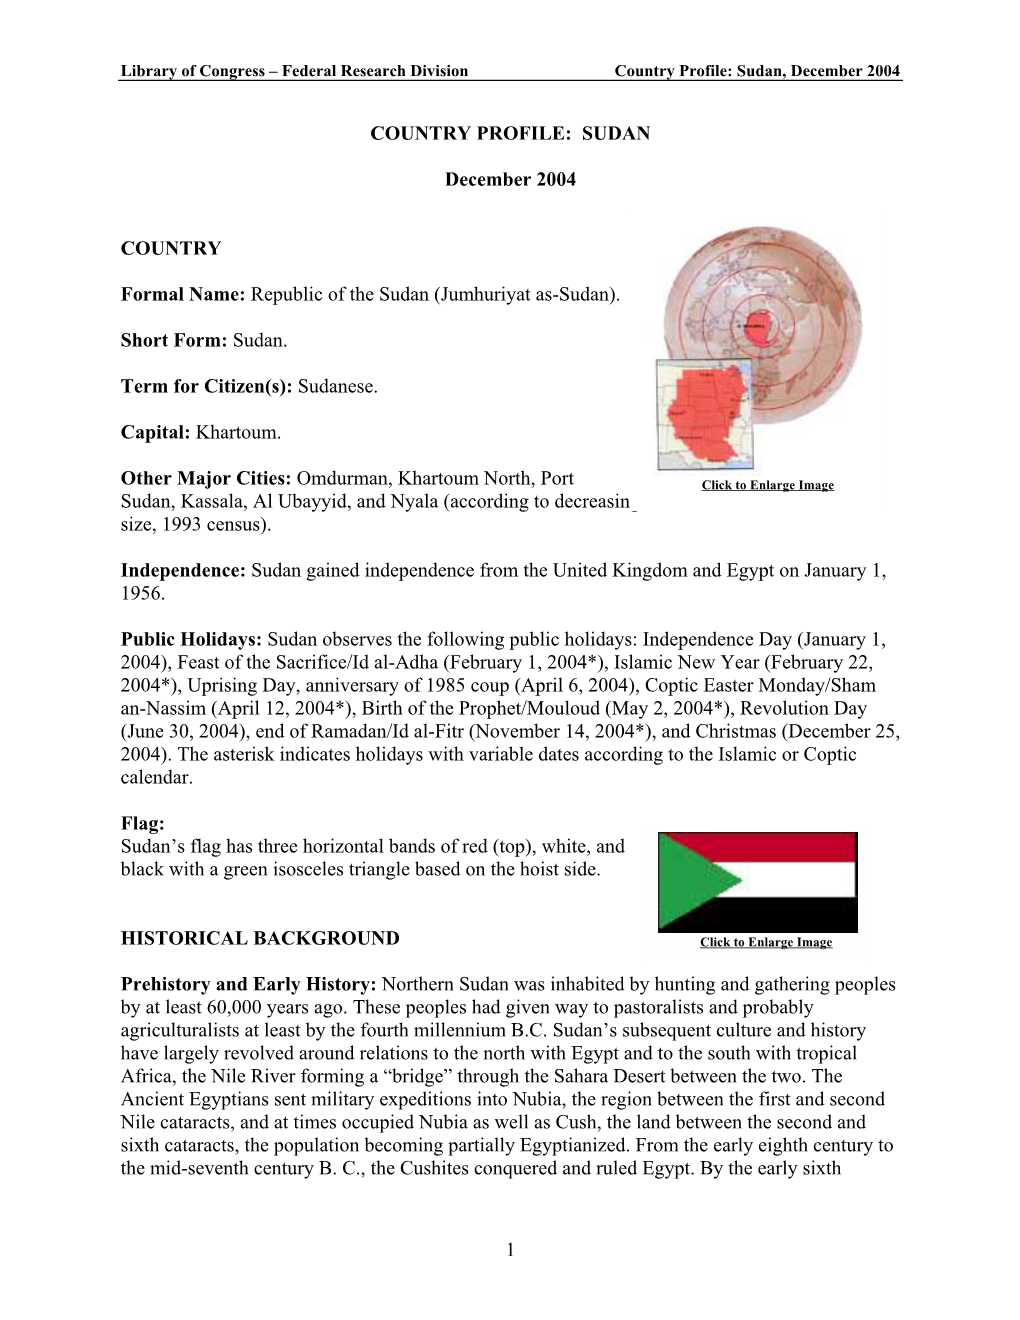 Federal Research Division Country Profile: Sudan, December 2004